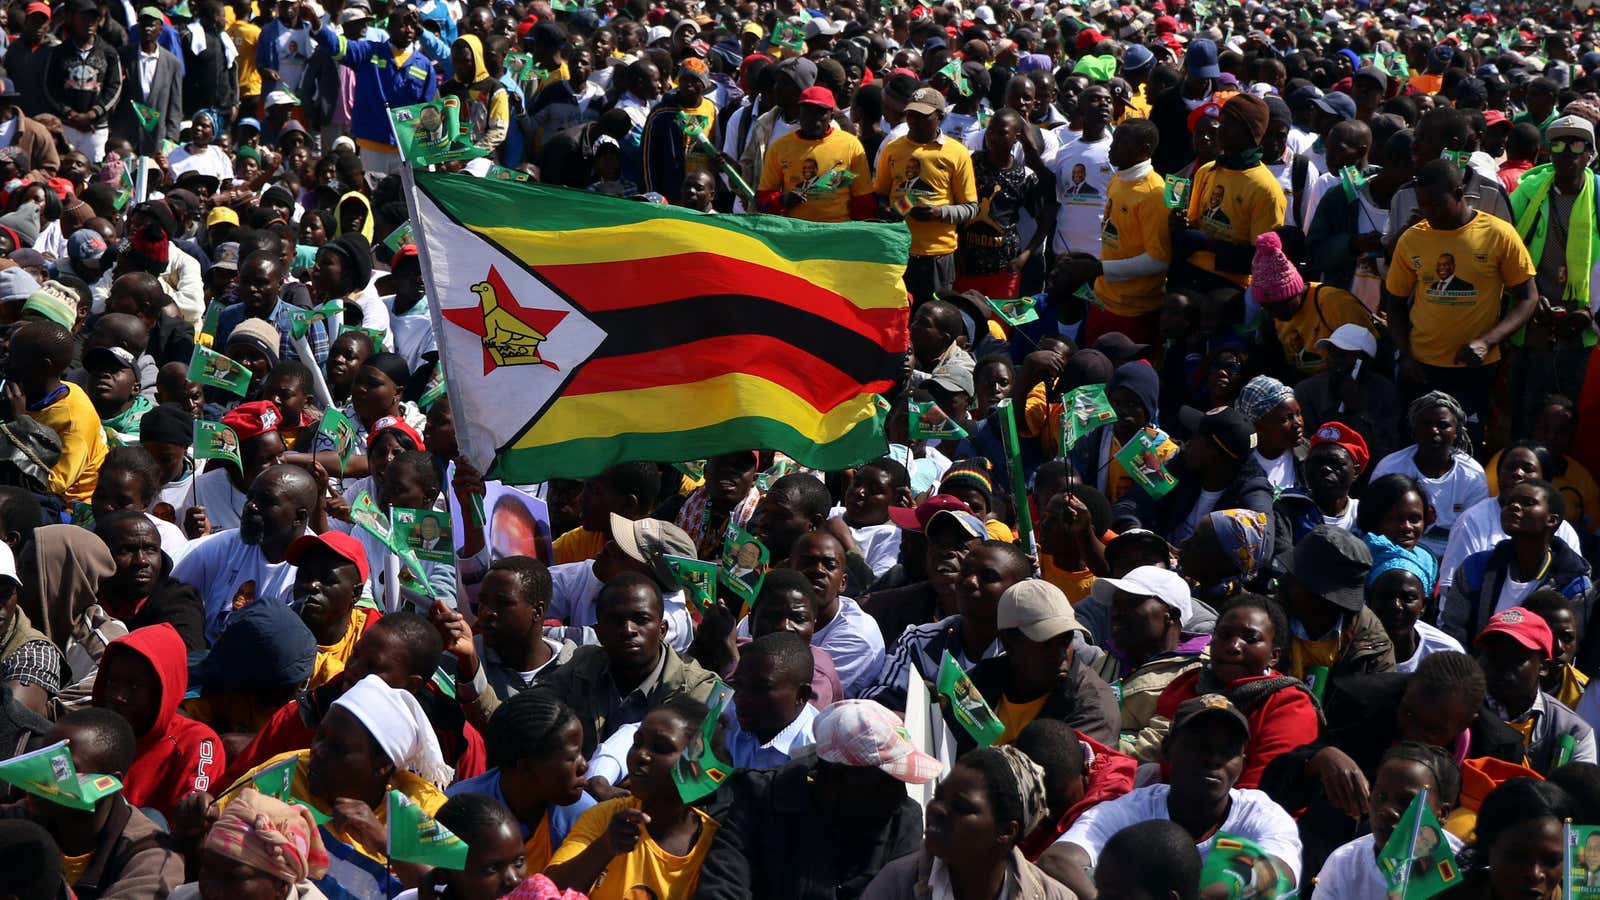 Supporters of president Emmerson Mnangagwa gather at an election rally in Marondera, Zimbabwe